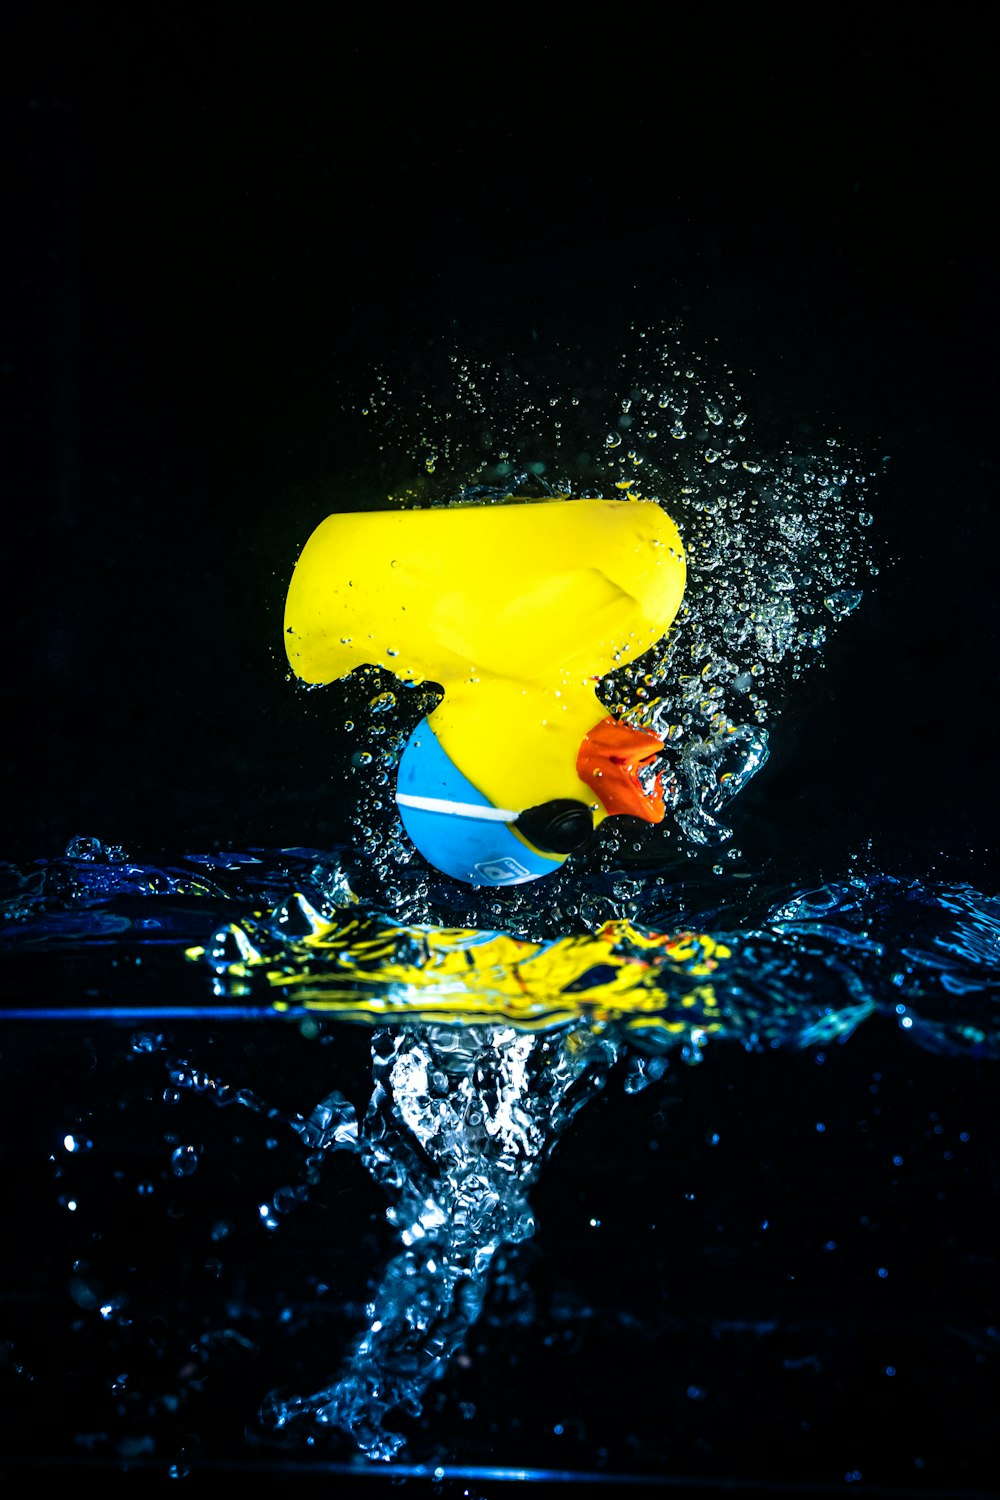 yellow plastic cup on water